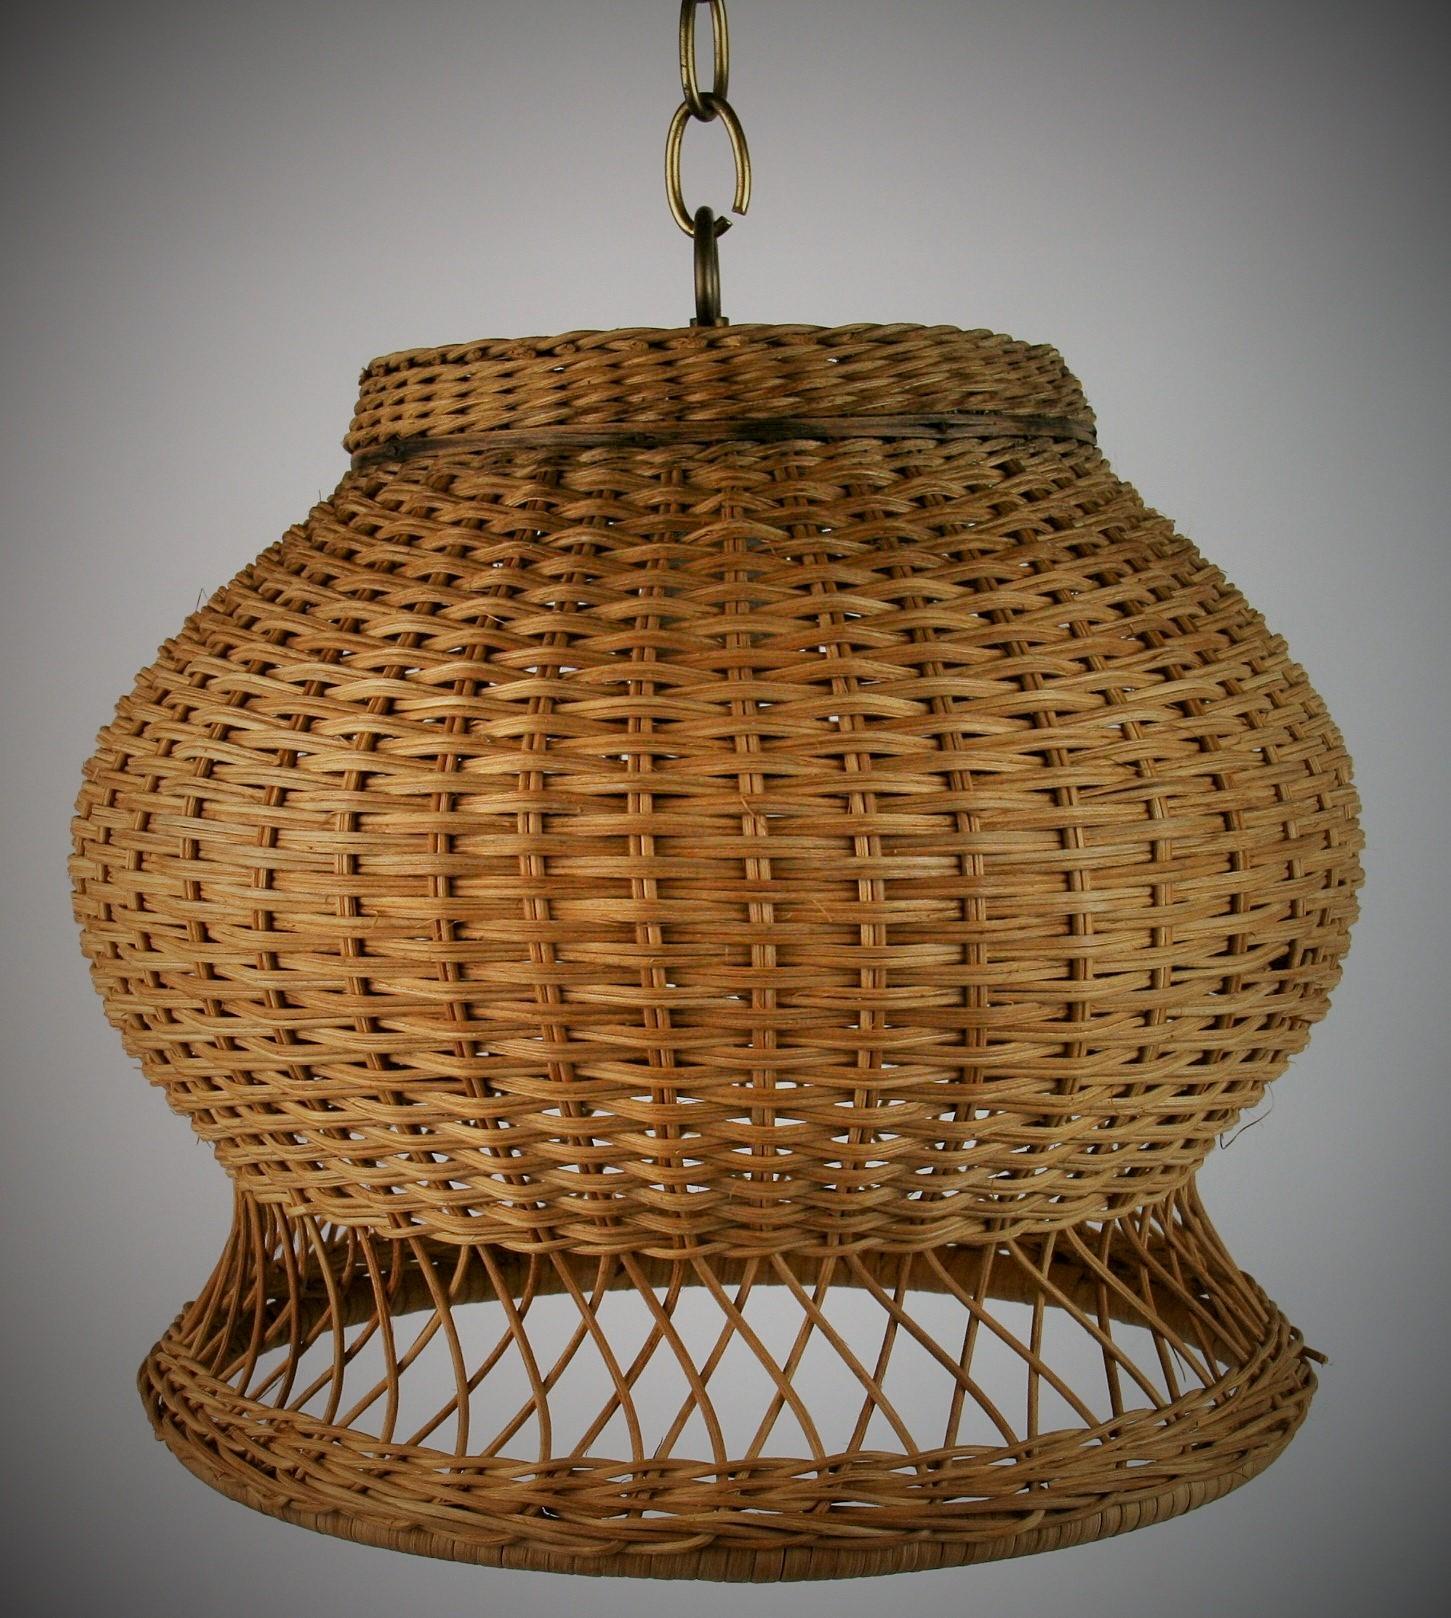 3-416 bell shaped hand made wicker pendant light
Takes one 100 watt max Edison based bulb
Rewired
Supplied with 3 feet chain and canopy.